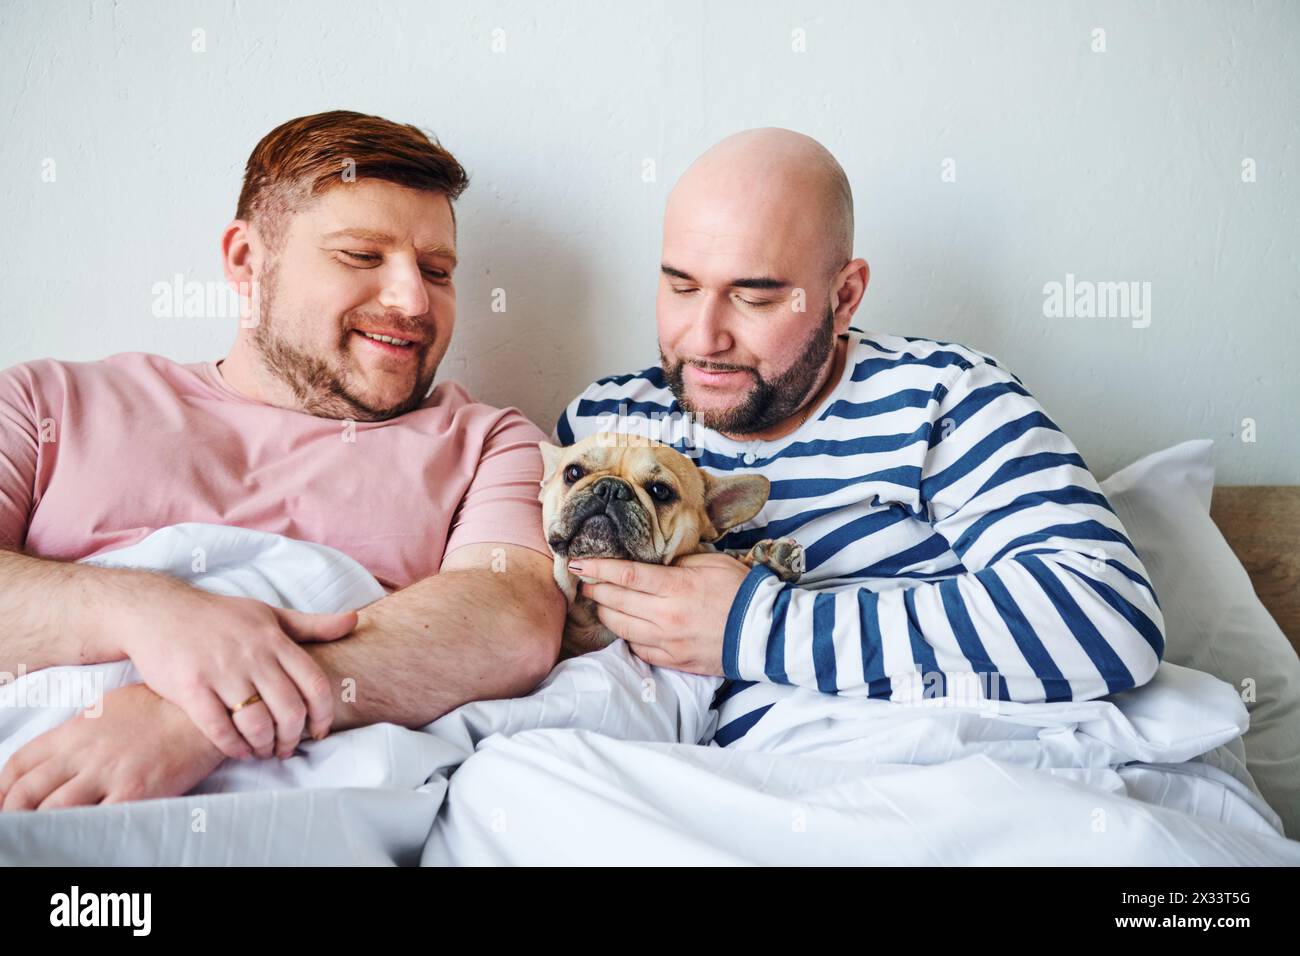 Two men holding a small dog on top of a bed. Stock Photo